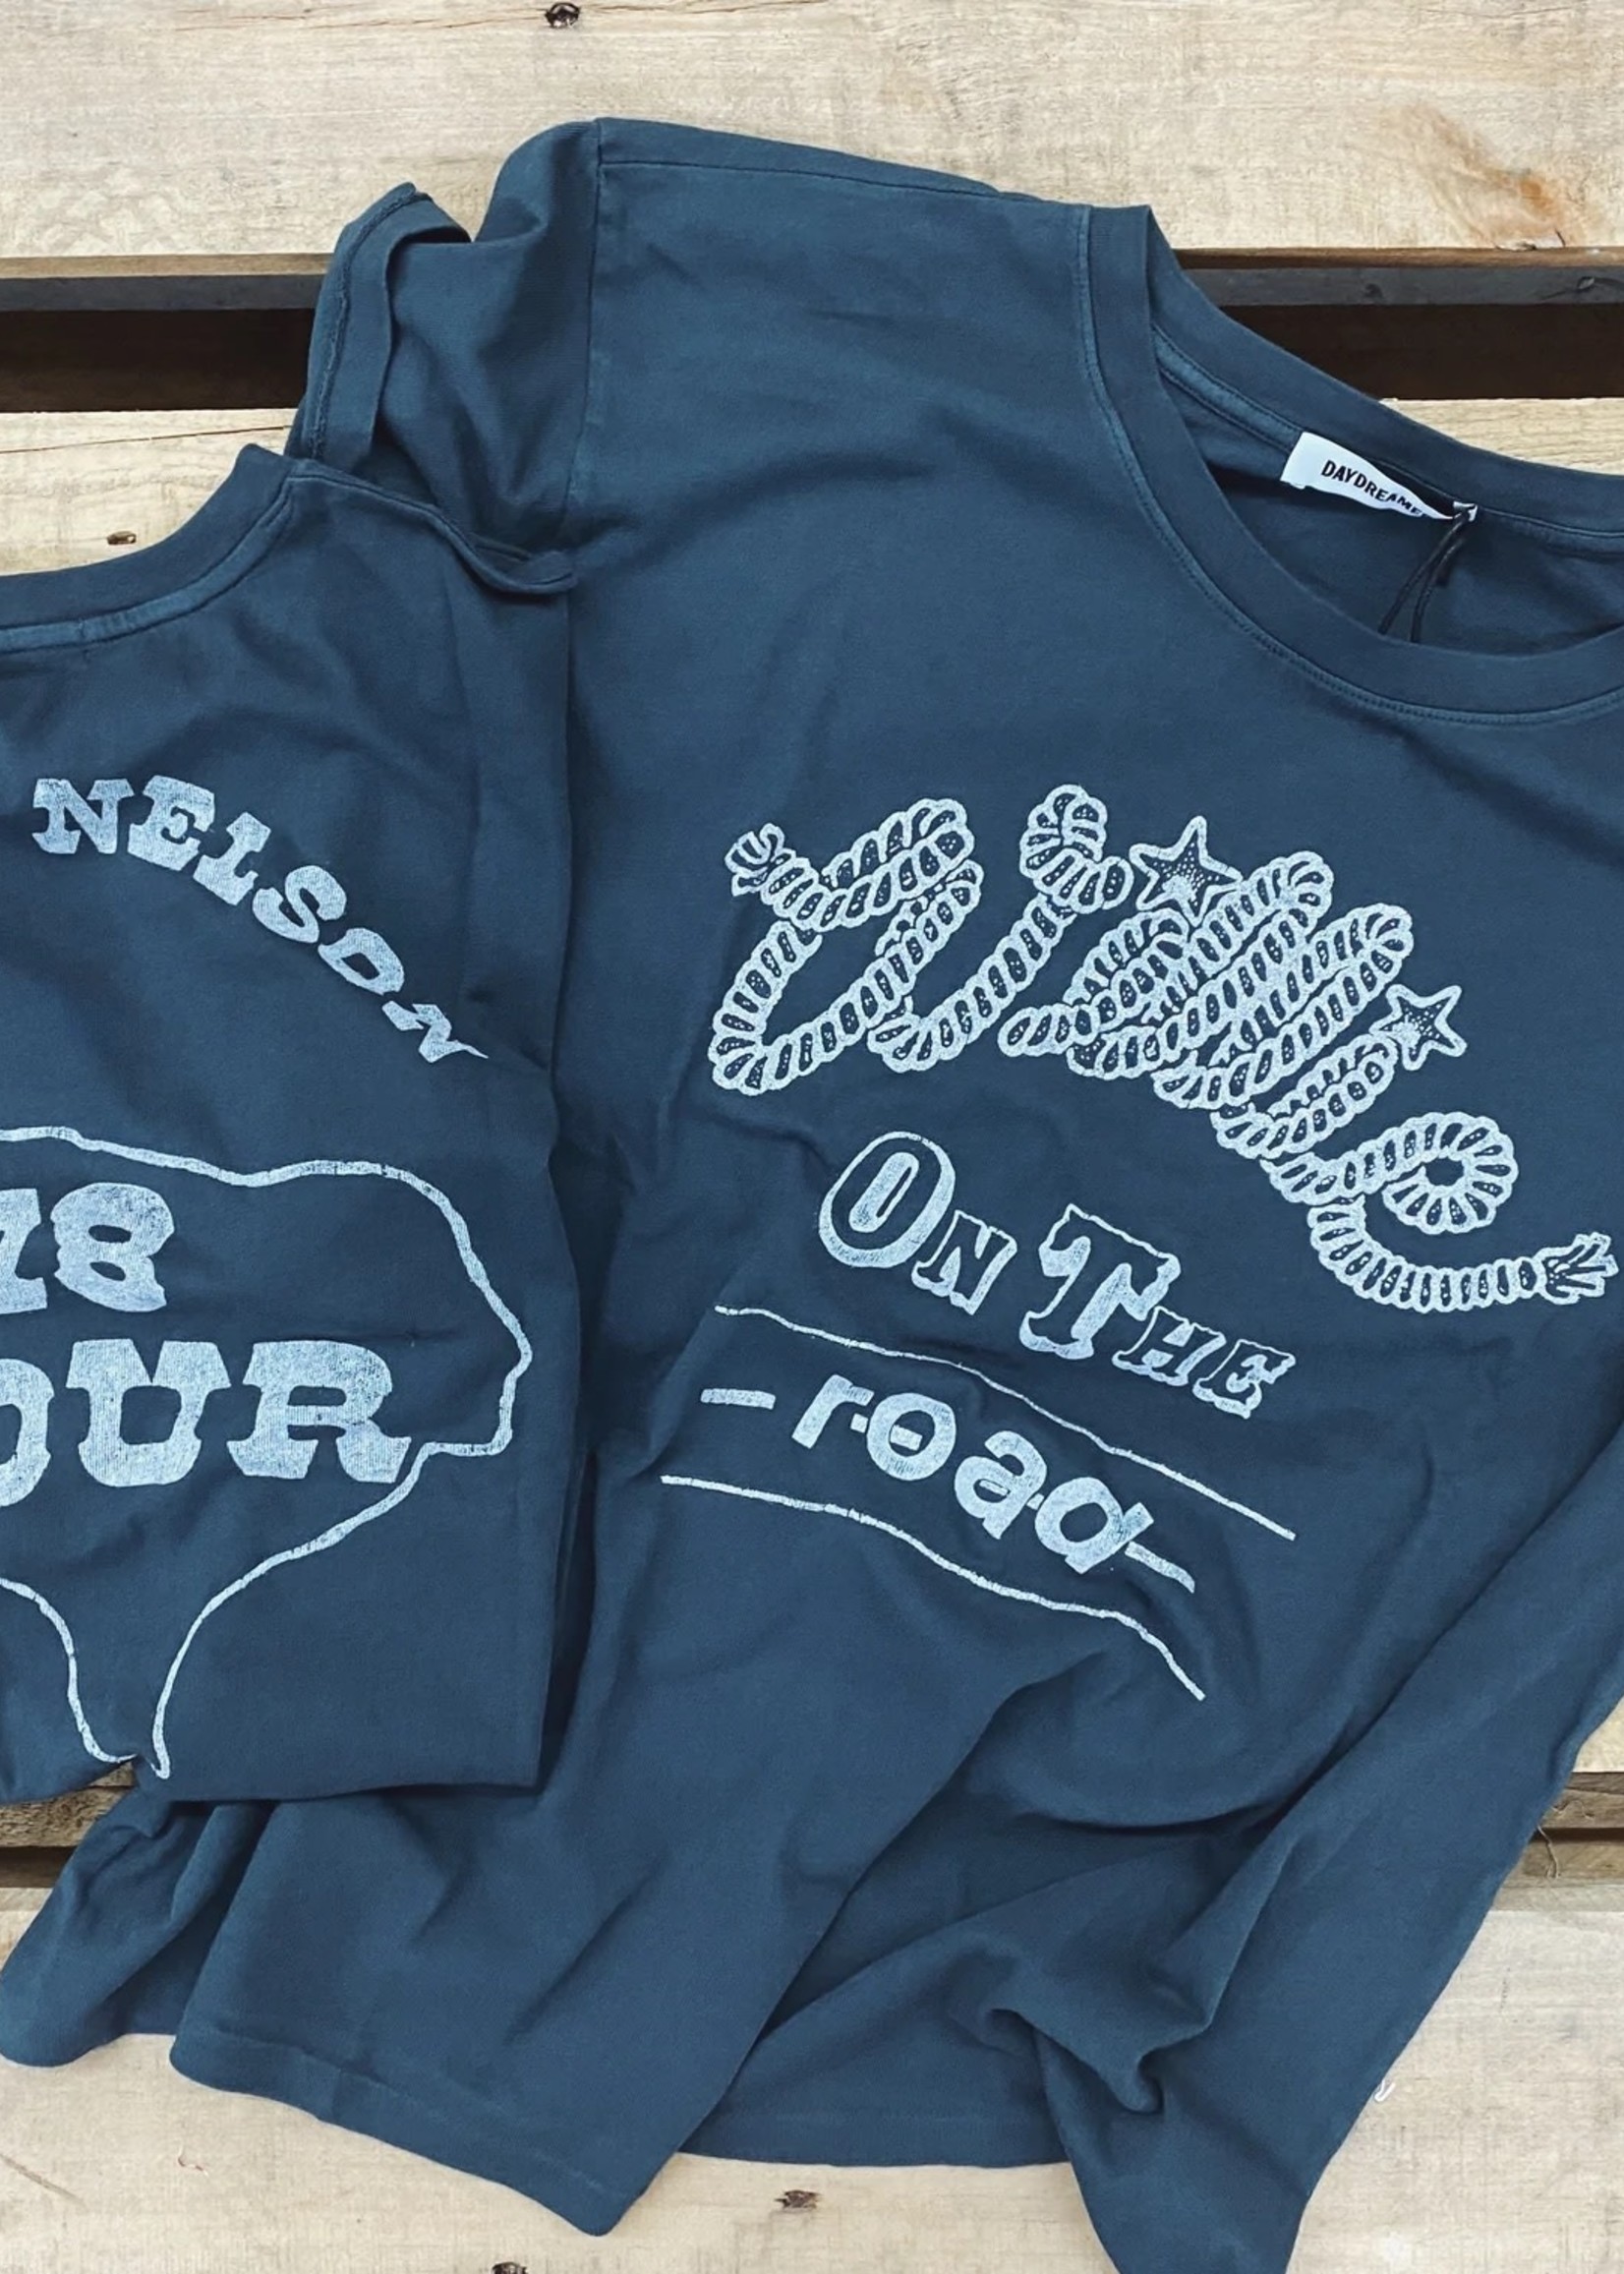 Willie Nelson On The Road Tour Tee